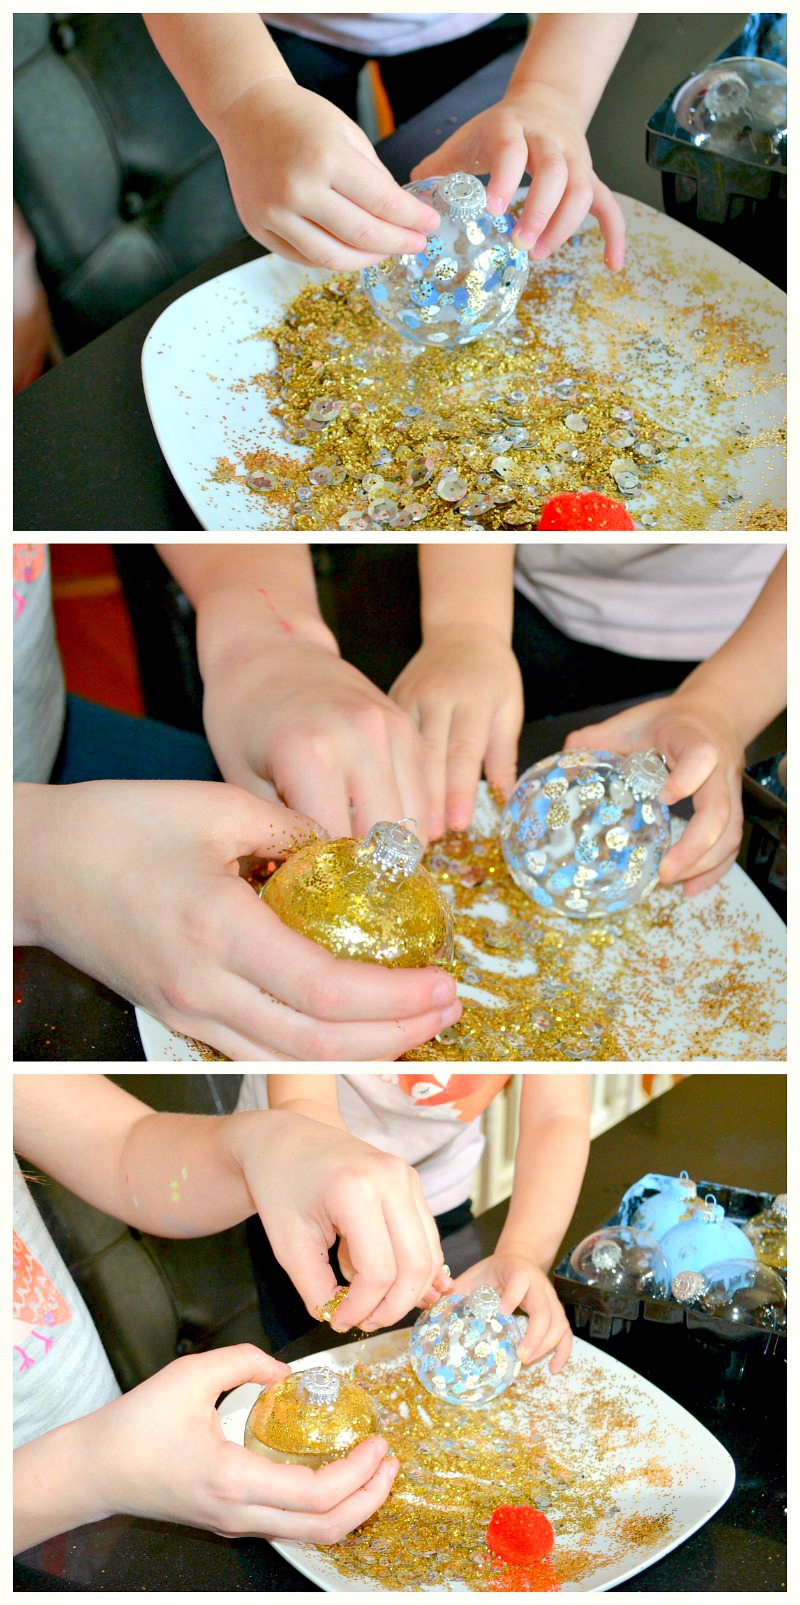 Host a Christmas Ornament Making Party